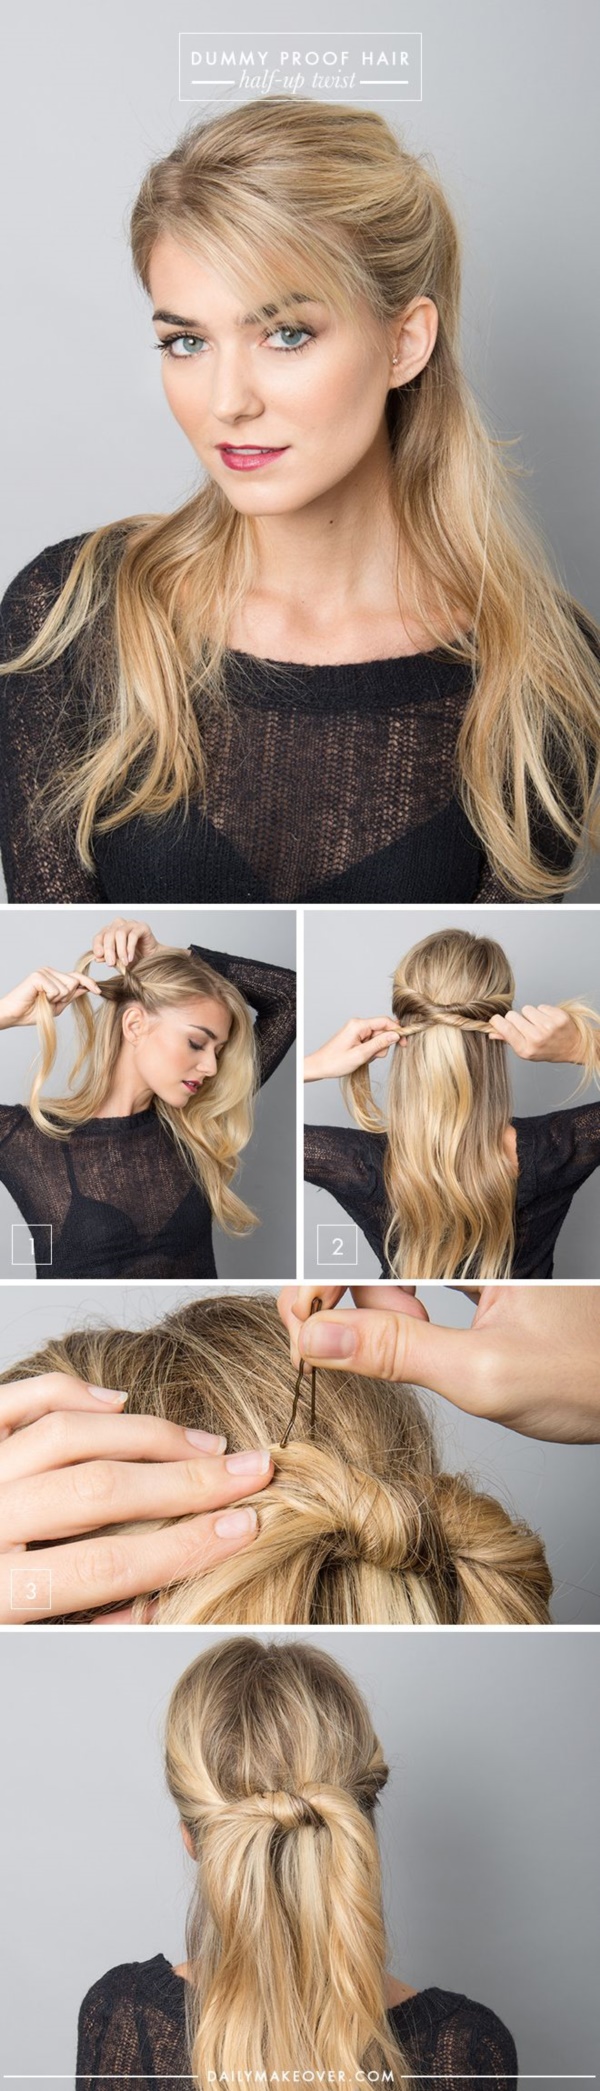 3 Minute Hairstyles for Business Women